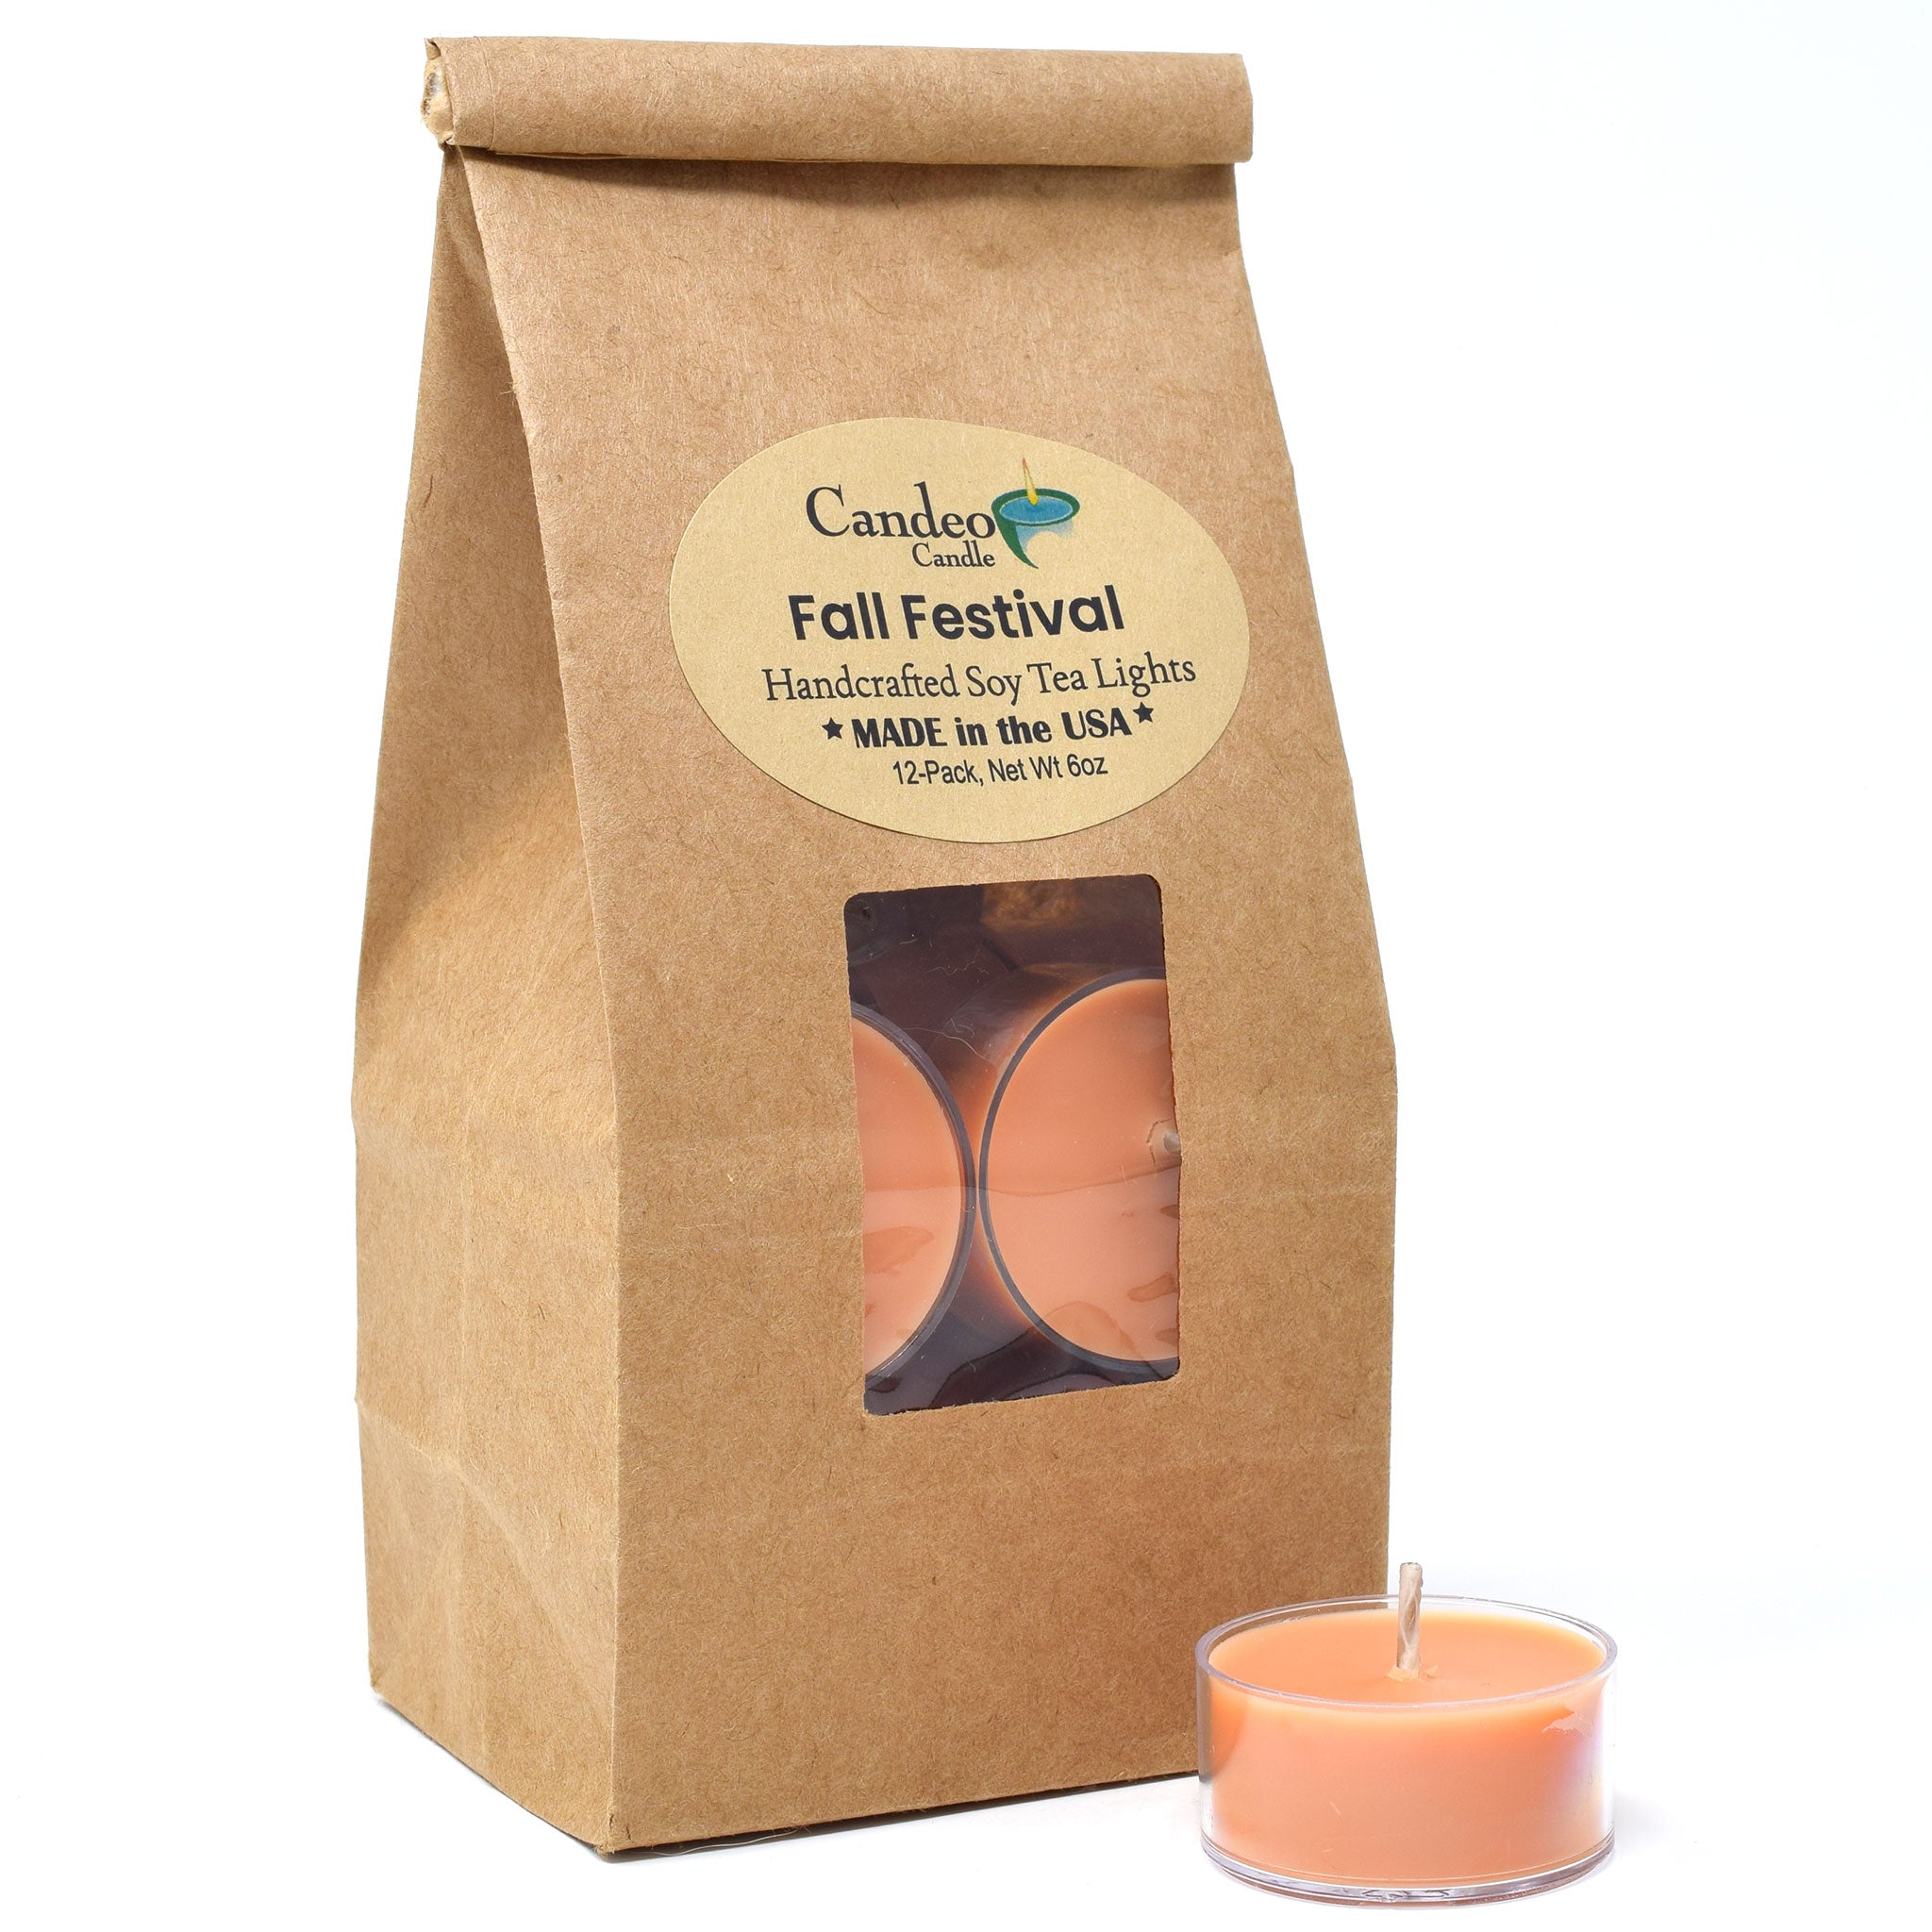 Fall Festival, Soy Tea Light 12-Pack - Candeo Candle